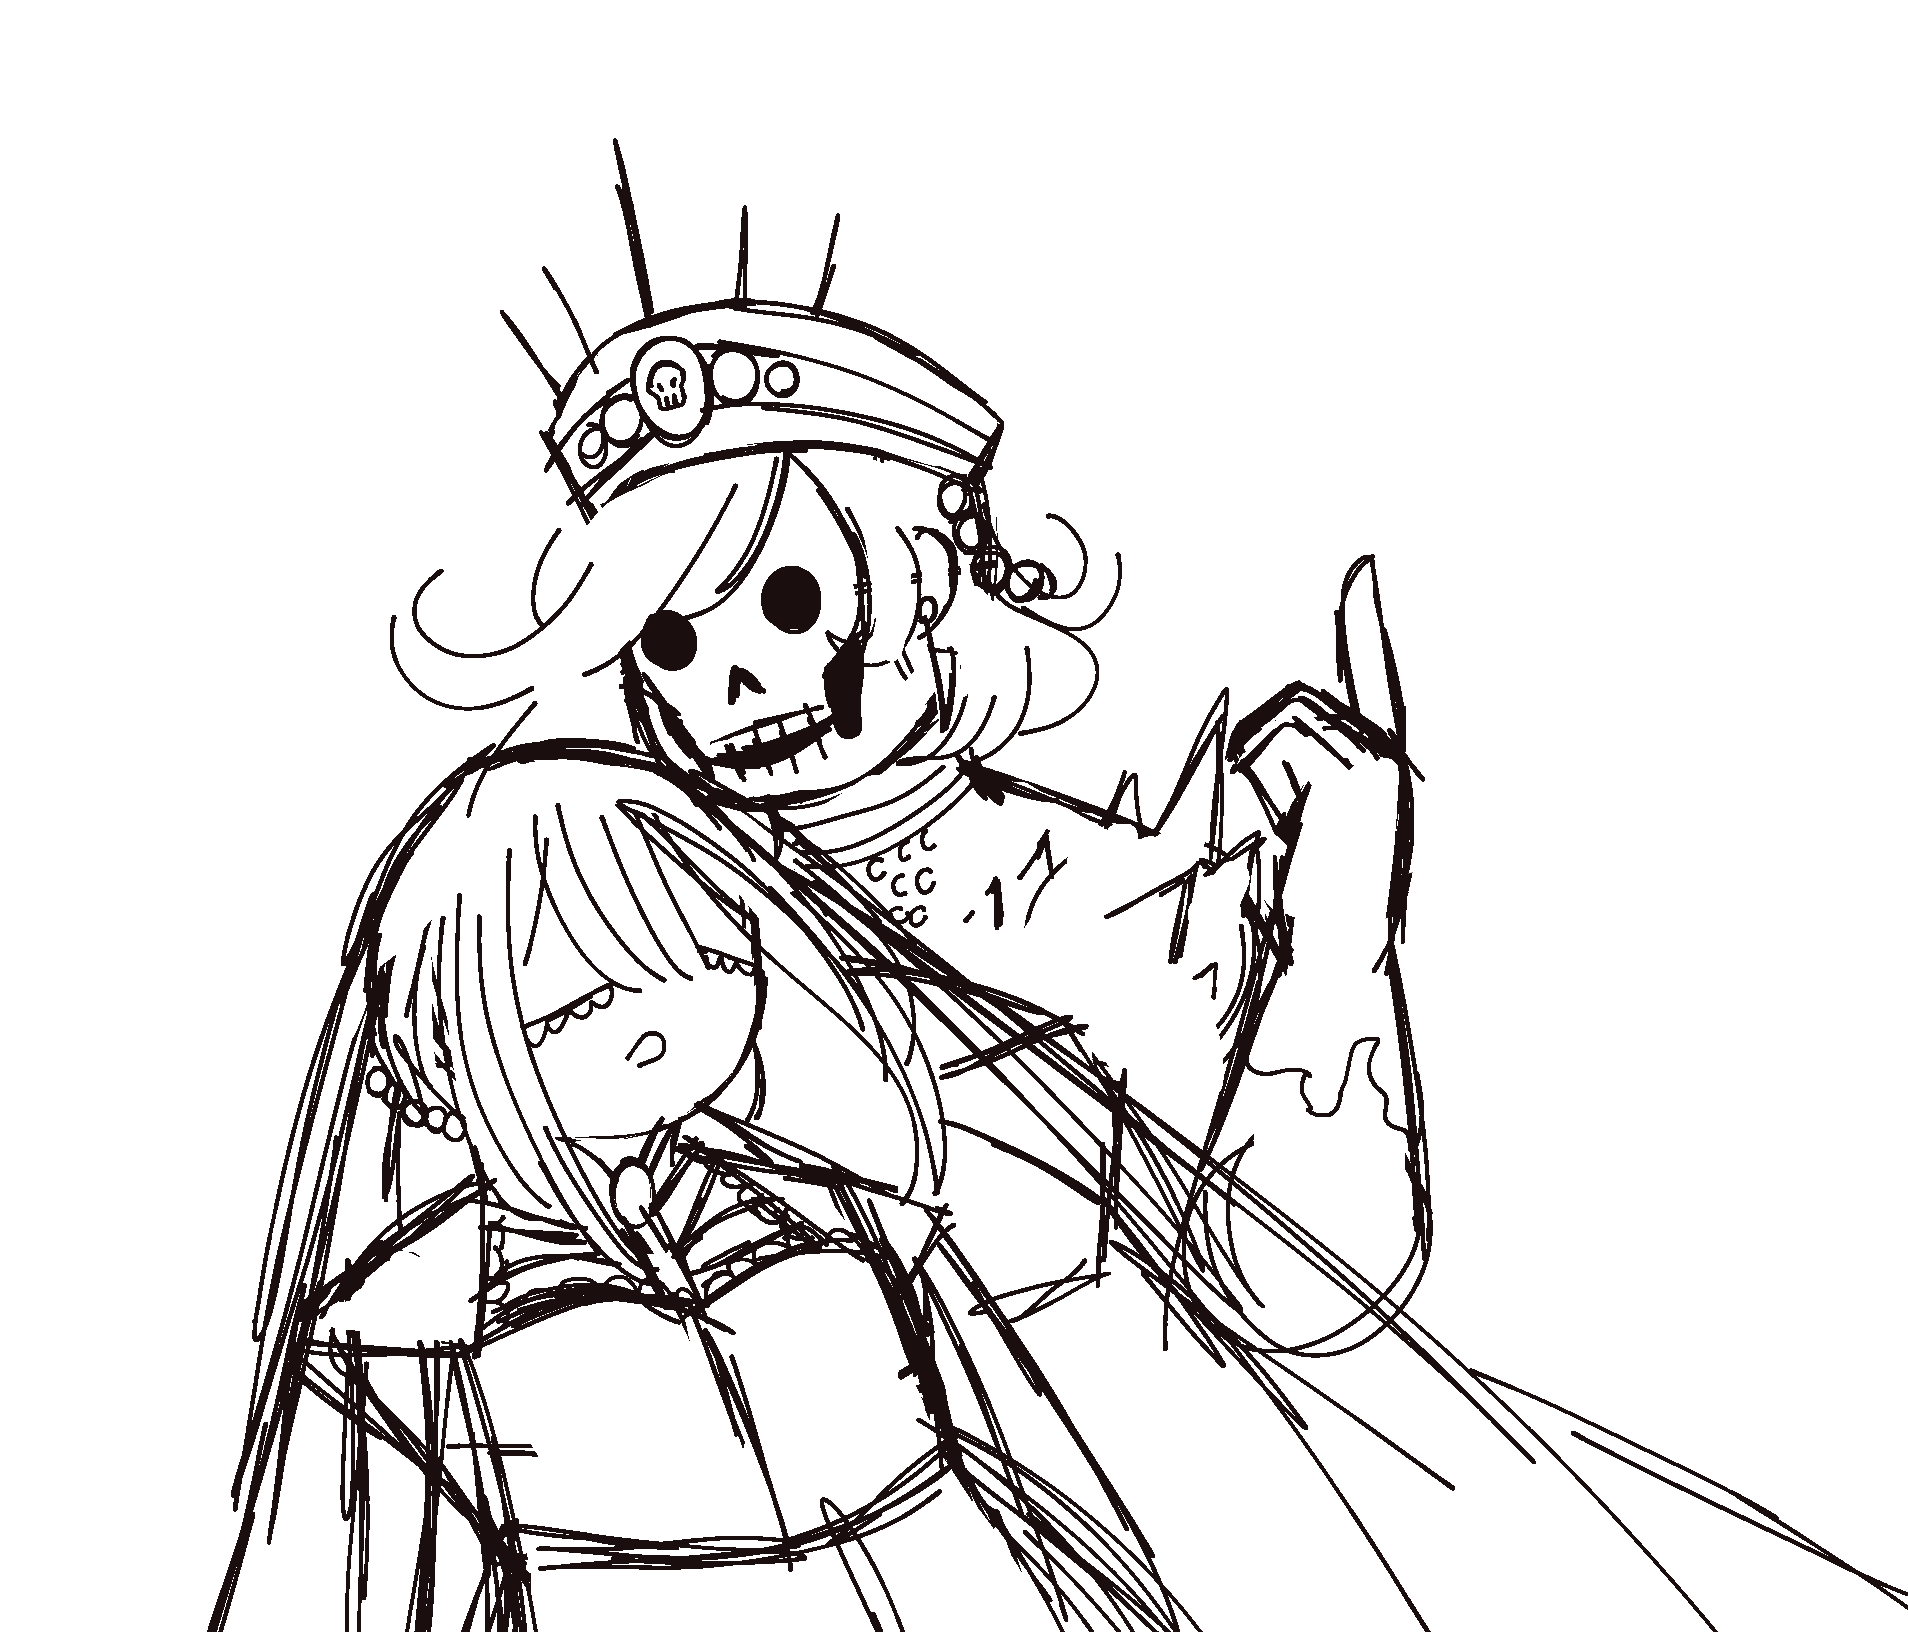 a sketch of the Ribcage Witch being held by Melia as she speaks to them.